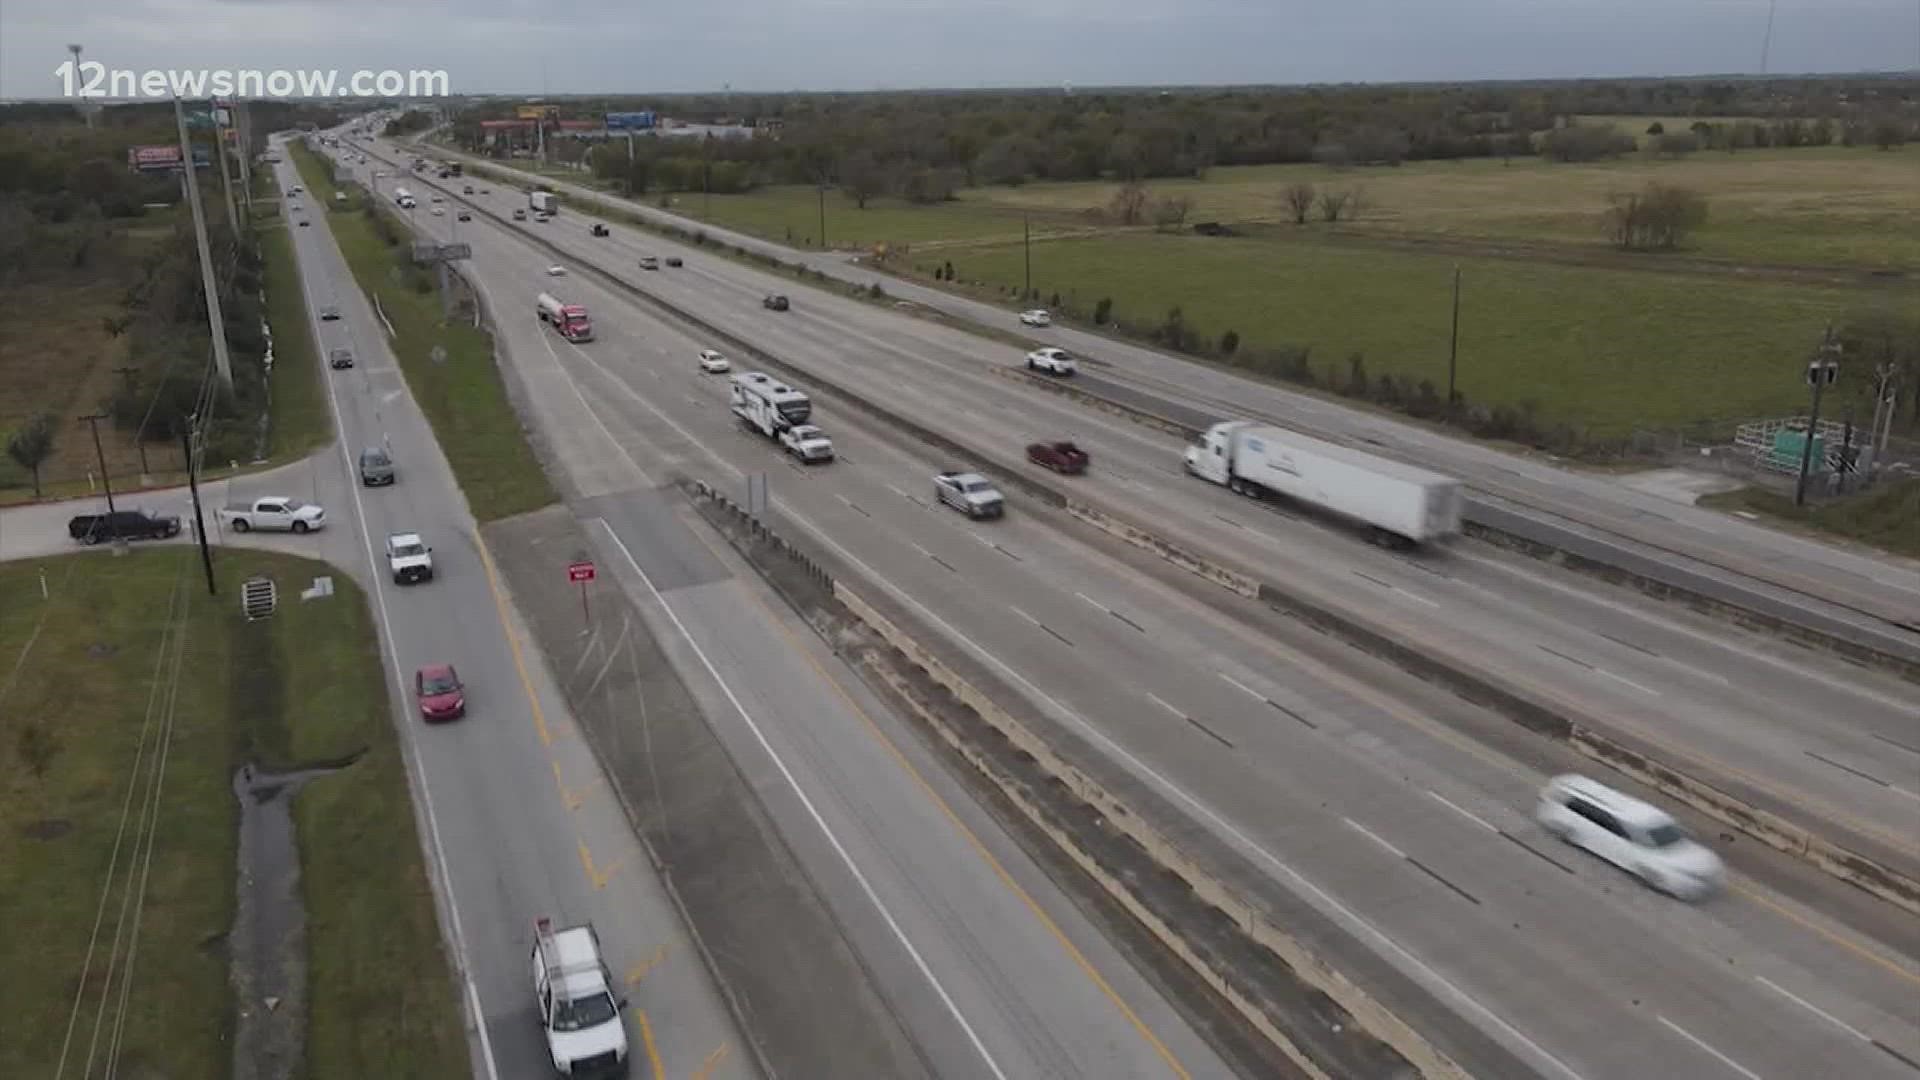 TxDot is reminding drivers that in 2020 alone, a quarter of traffic crash deaths involved drinking and driving in the Beaumont area.